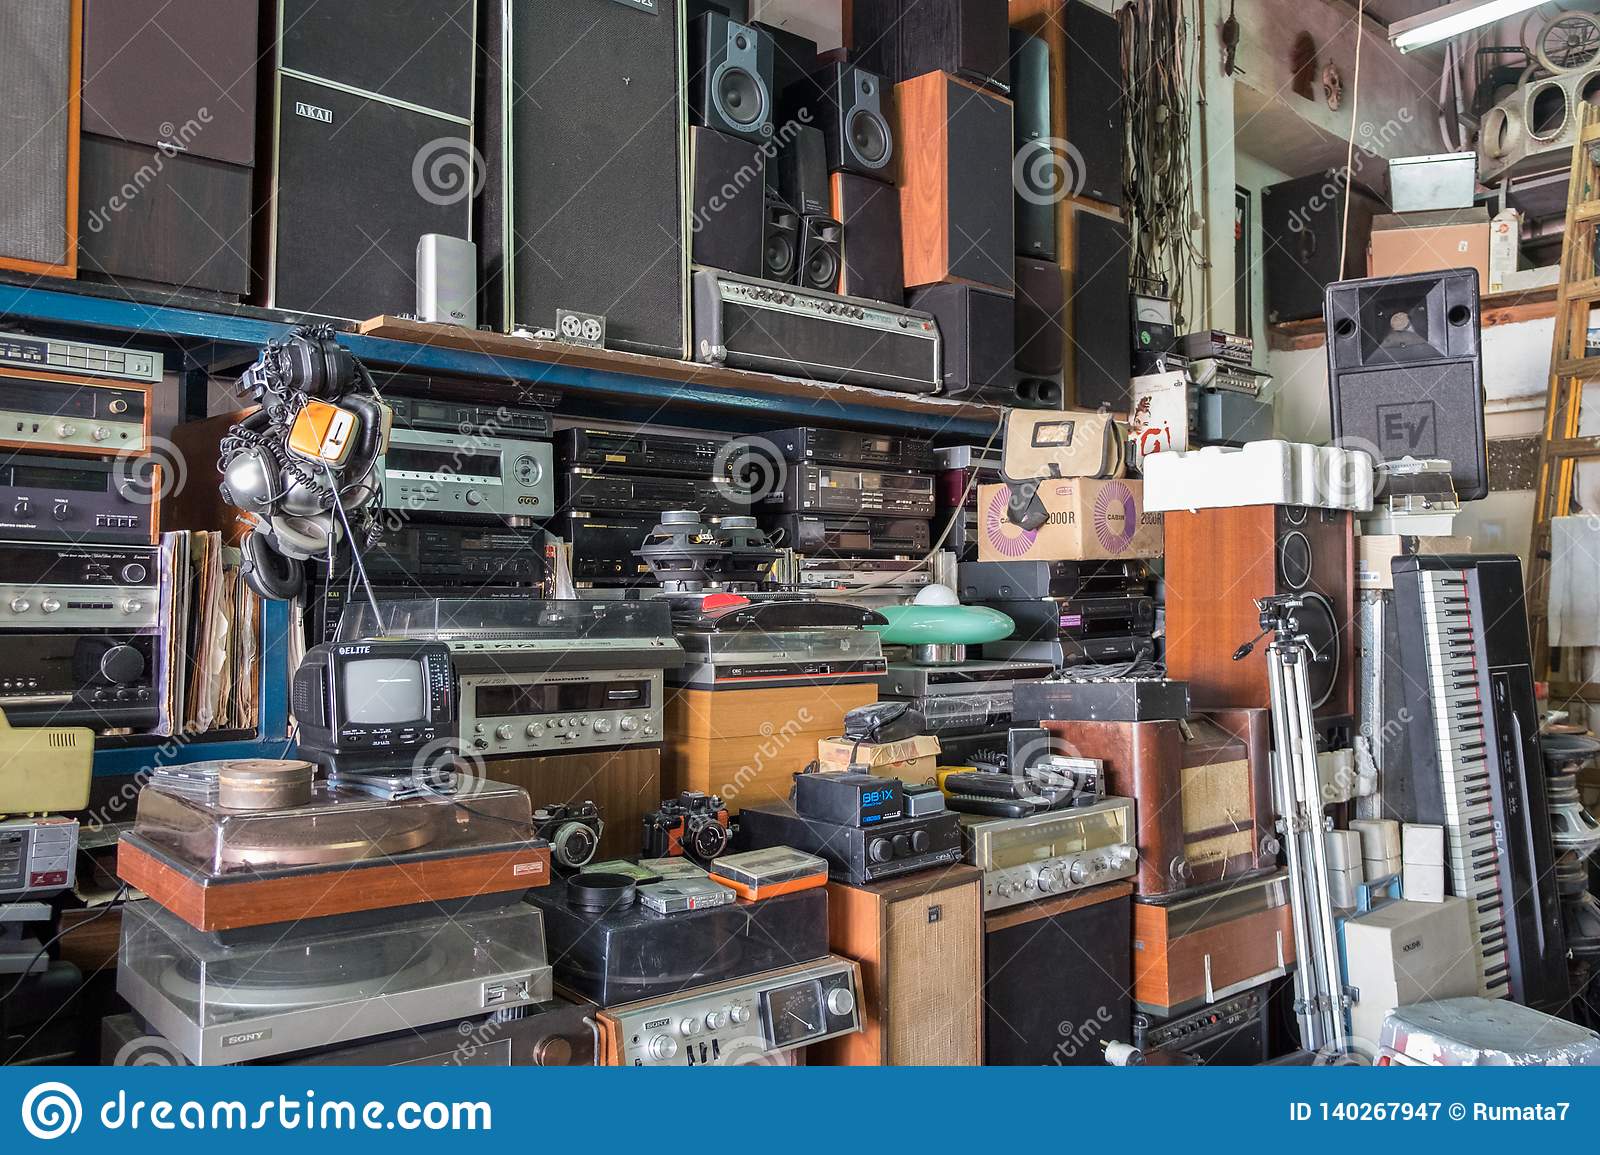 vintage-radio-receivers-tv-speakers-other-old-electronic-devices-jaffa-flea-market-store-shelv...jpg